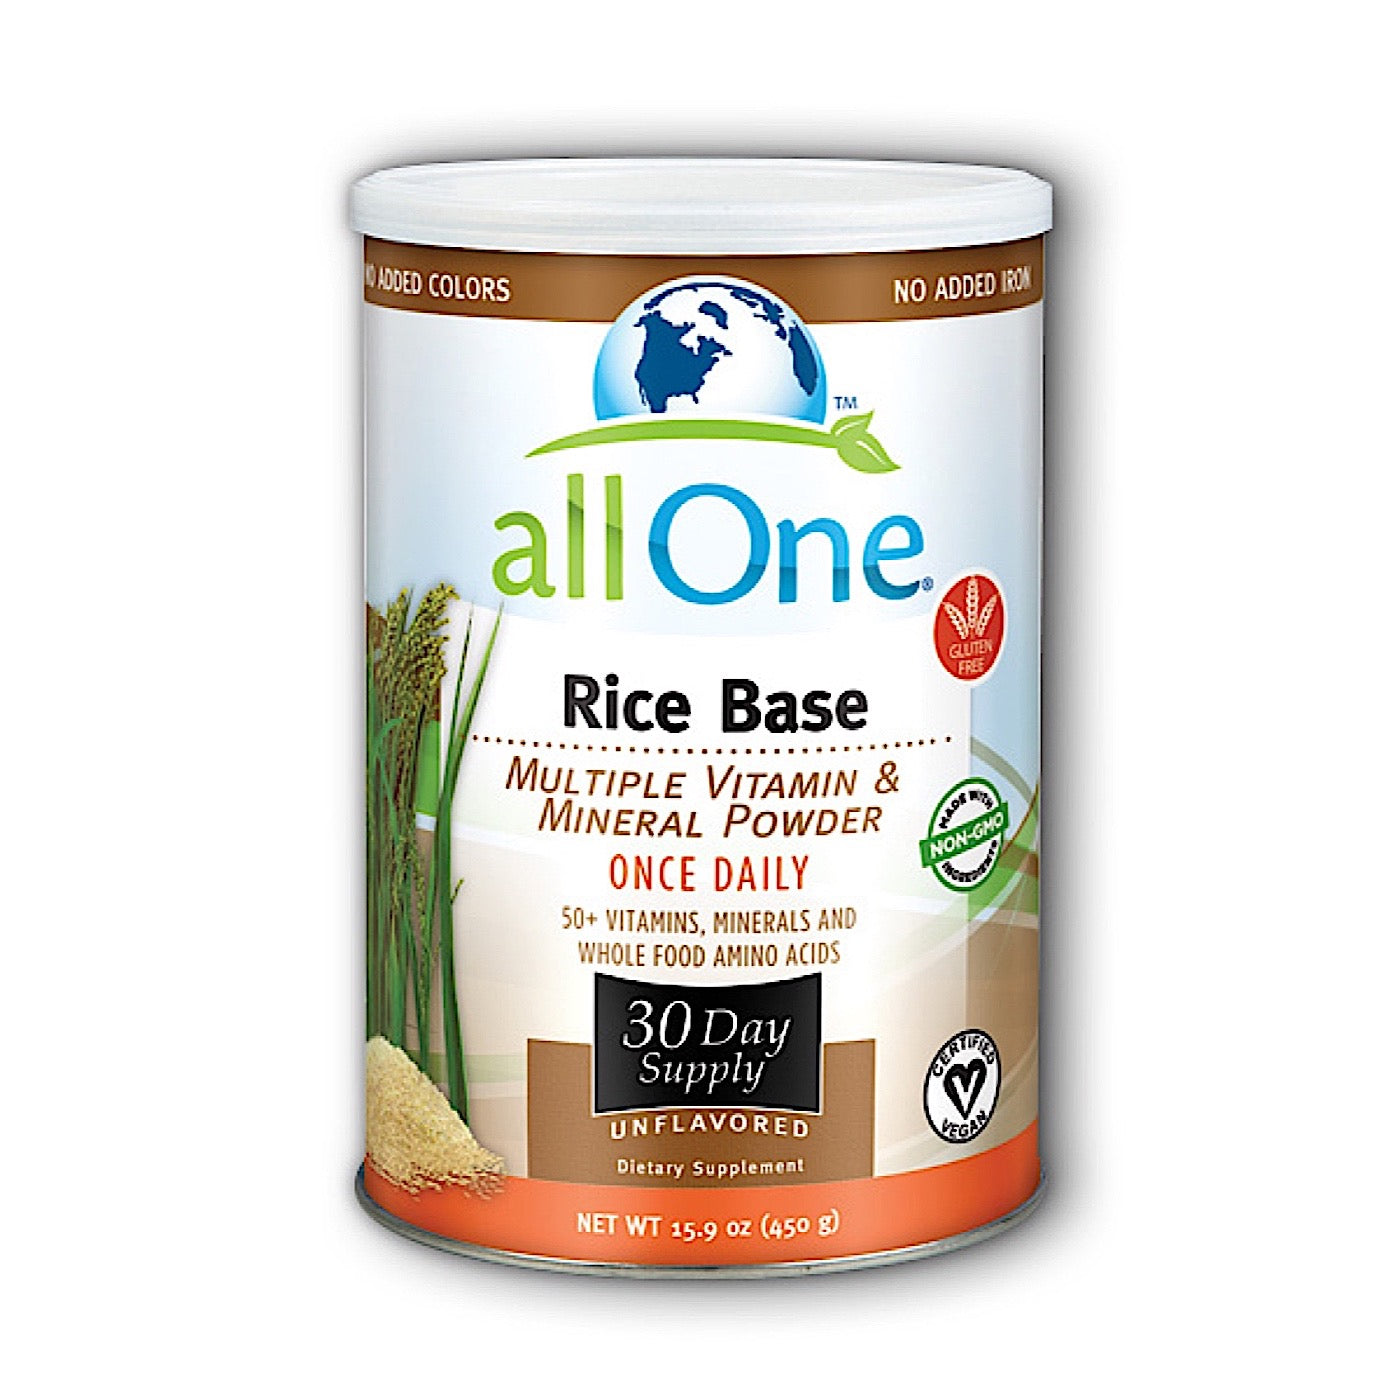 All One Rice Base Multiple Vitamin & Mineral Powder